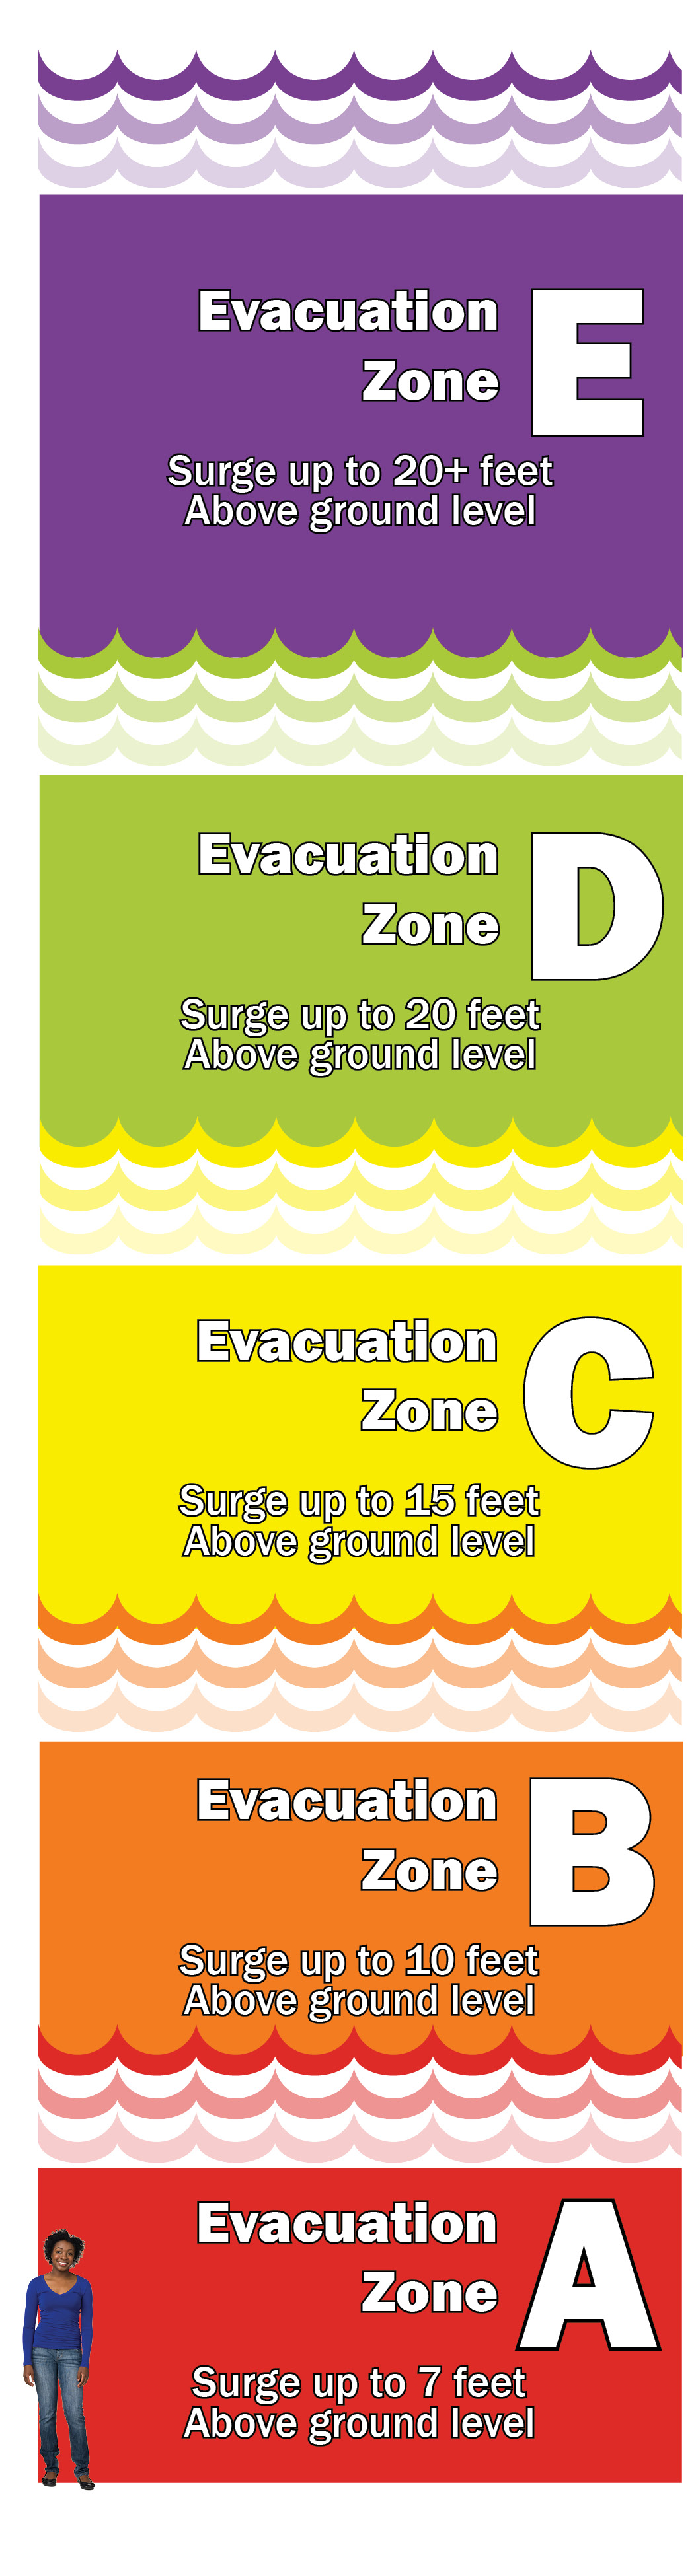 Evacuation and storm surge levels infographic - Evacuation E surge over 20 feet, D surge up to 20 feet, C to 15 feet, B up to 10 feet and A up to 7 feet above ground level